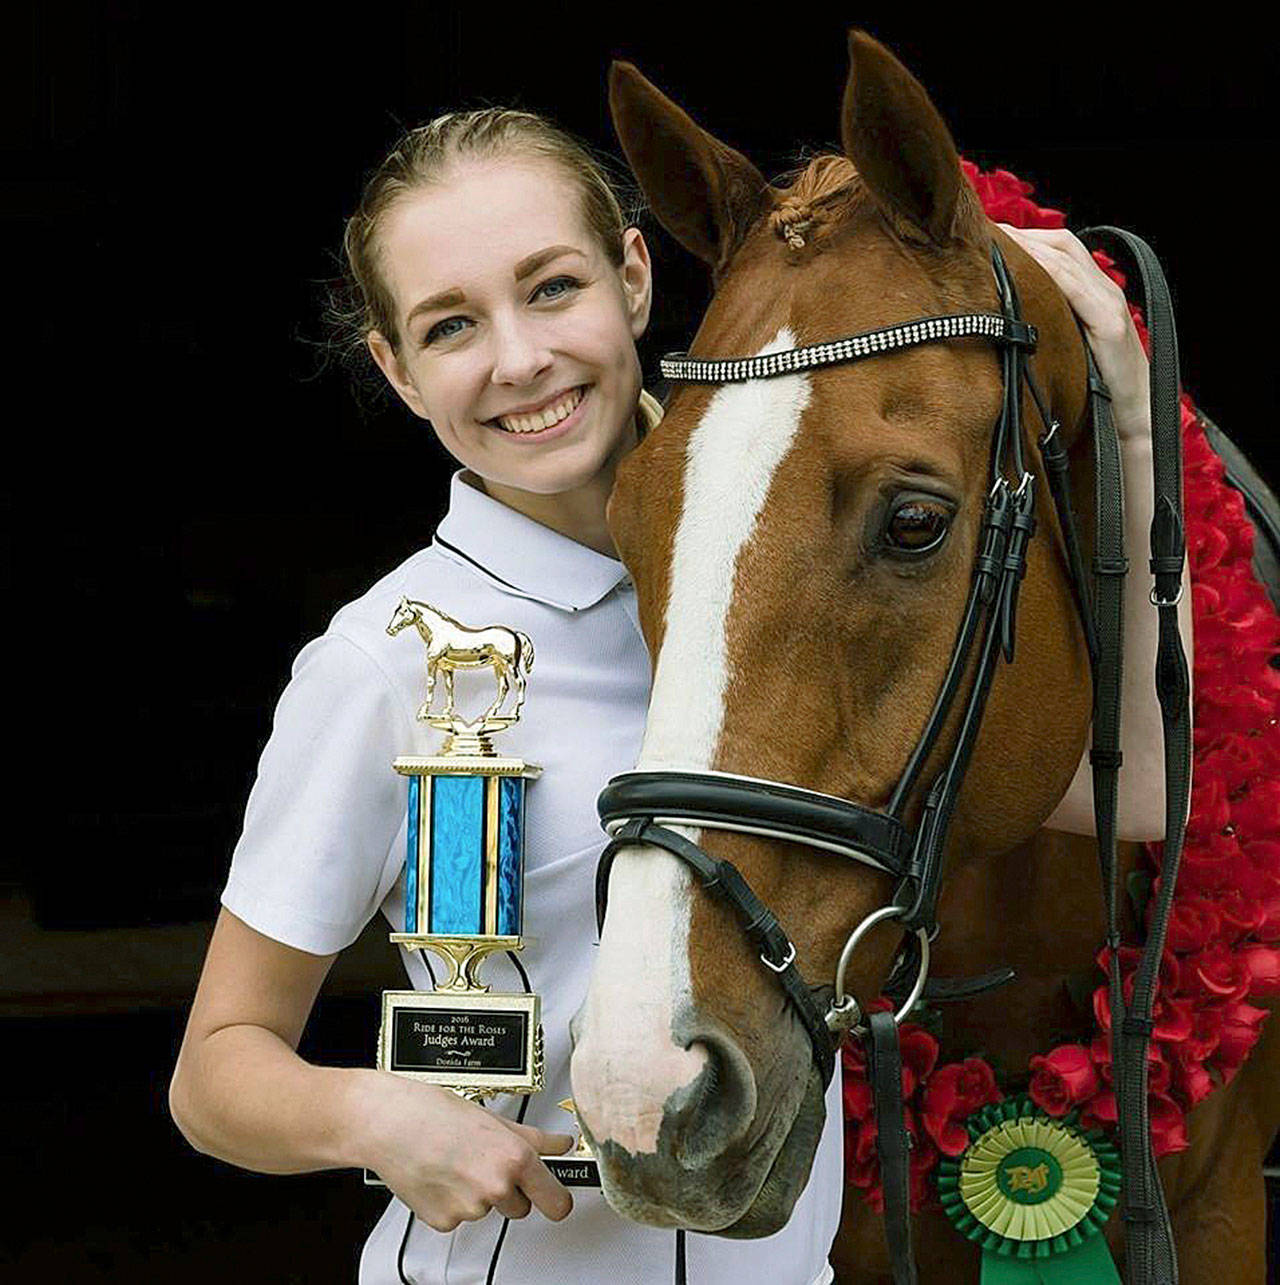 Grand champion: Kaisa Cannon with Kactus Relevation, an Anna Wetmore-owned horse, who raced at Emerald Downs until 2011. COURTESY PHOTO, Jessica Farren